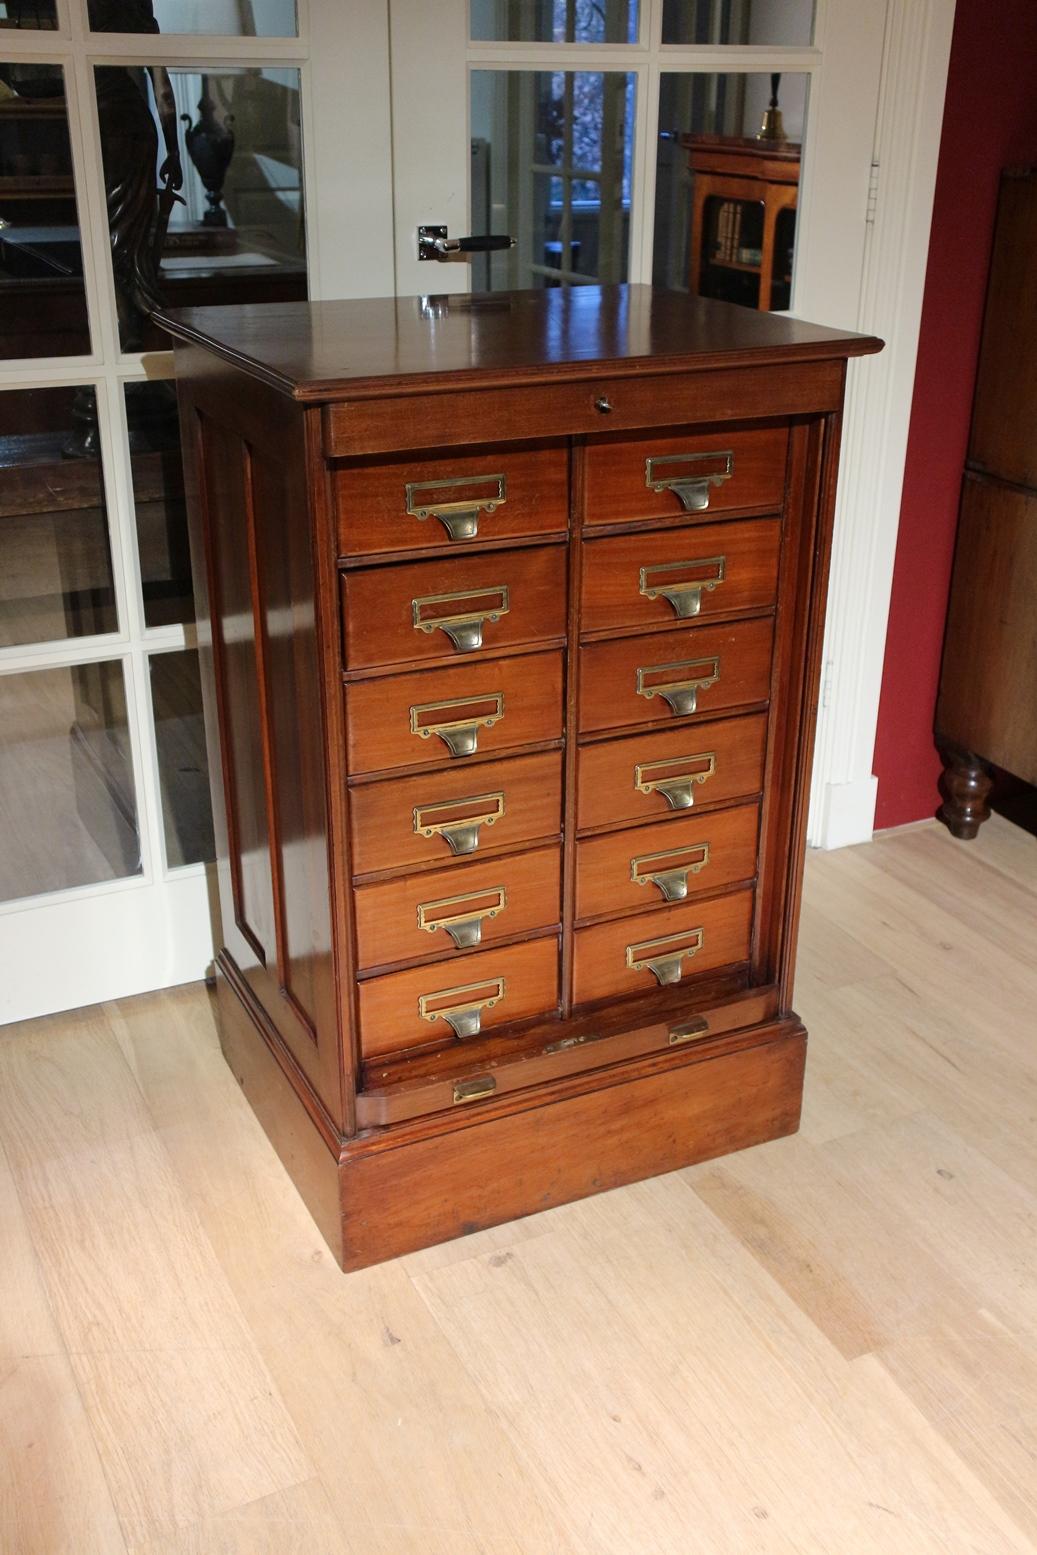 Antique mahogany filing cabinet from the famous company Shannon from the US. They also had a European branch in London. This one was made for the European market
This is a filing cabinet with 12 drawers and lockable by a roller shutter. The filing